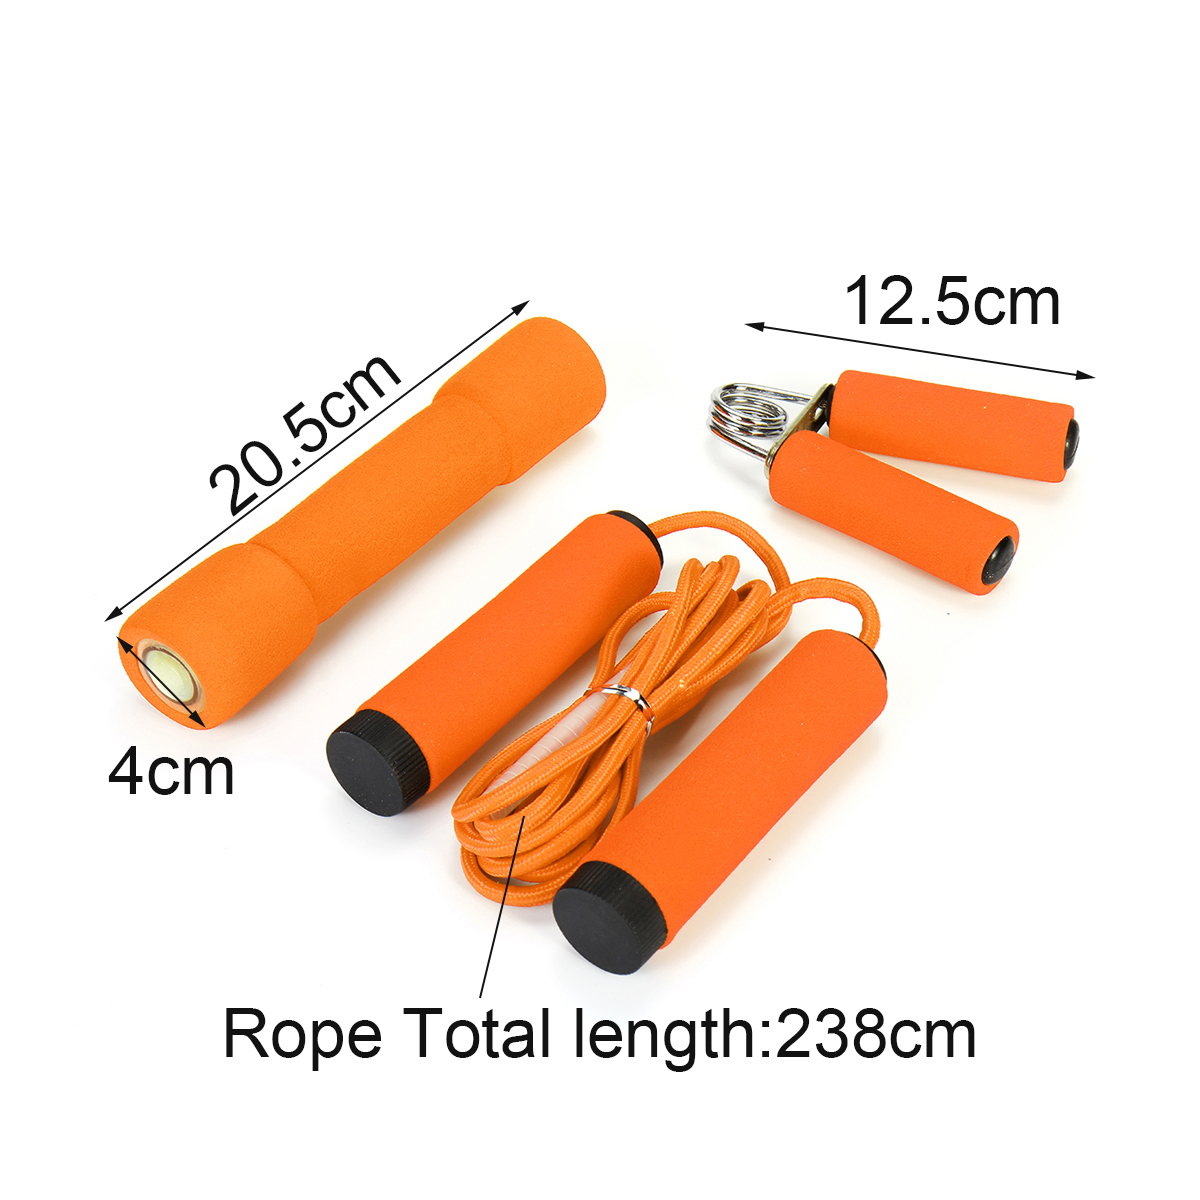 3PcsSet-Skipping-Rope-Fitness-Heavy-Hand-Gripper-Dumbbells-Muscle-Strength-Training-Tools-1692559-4